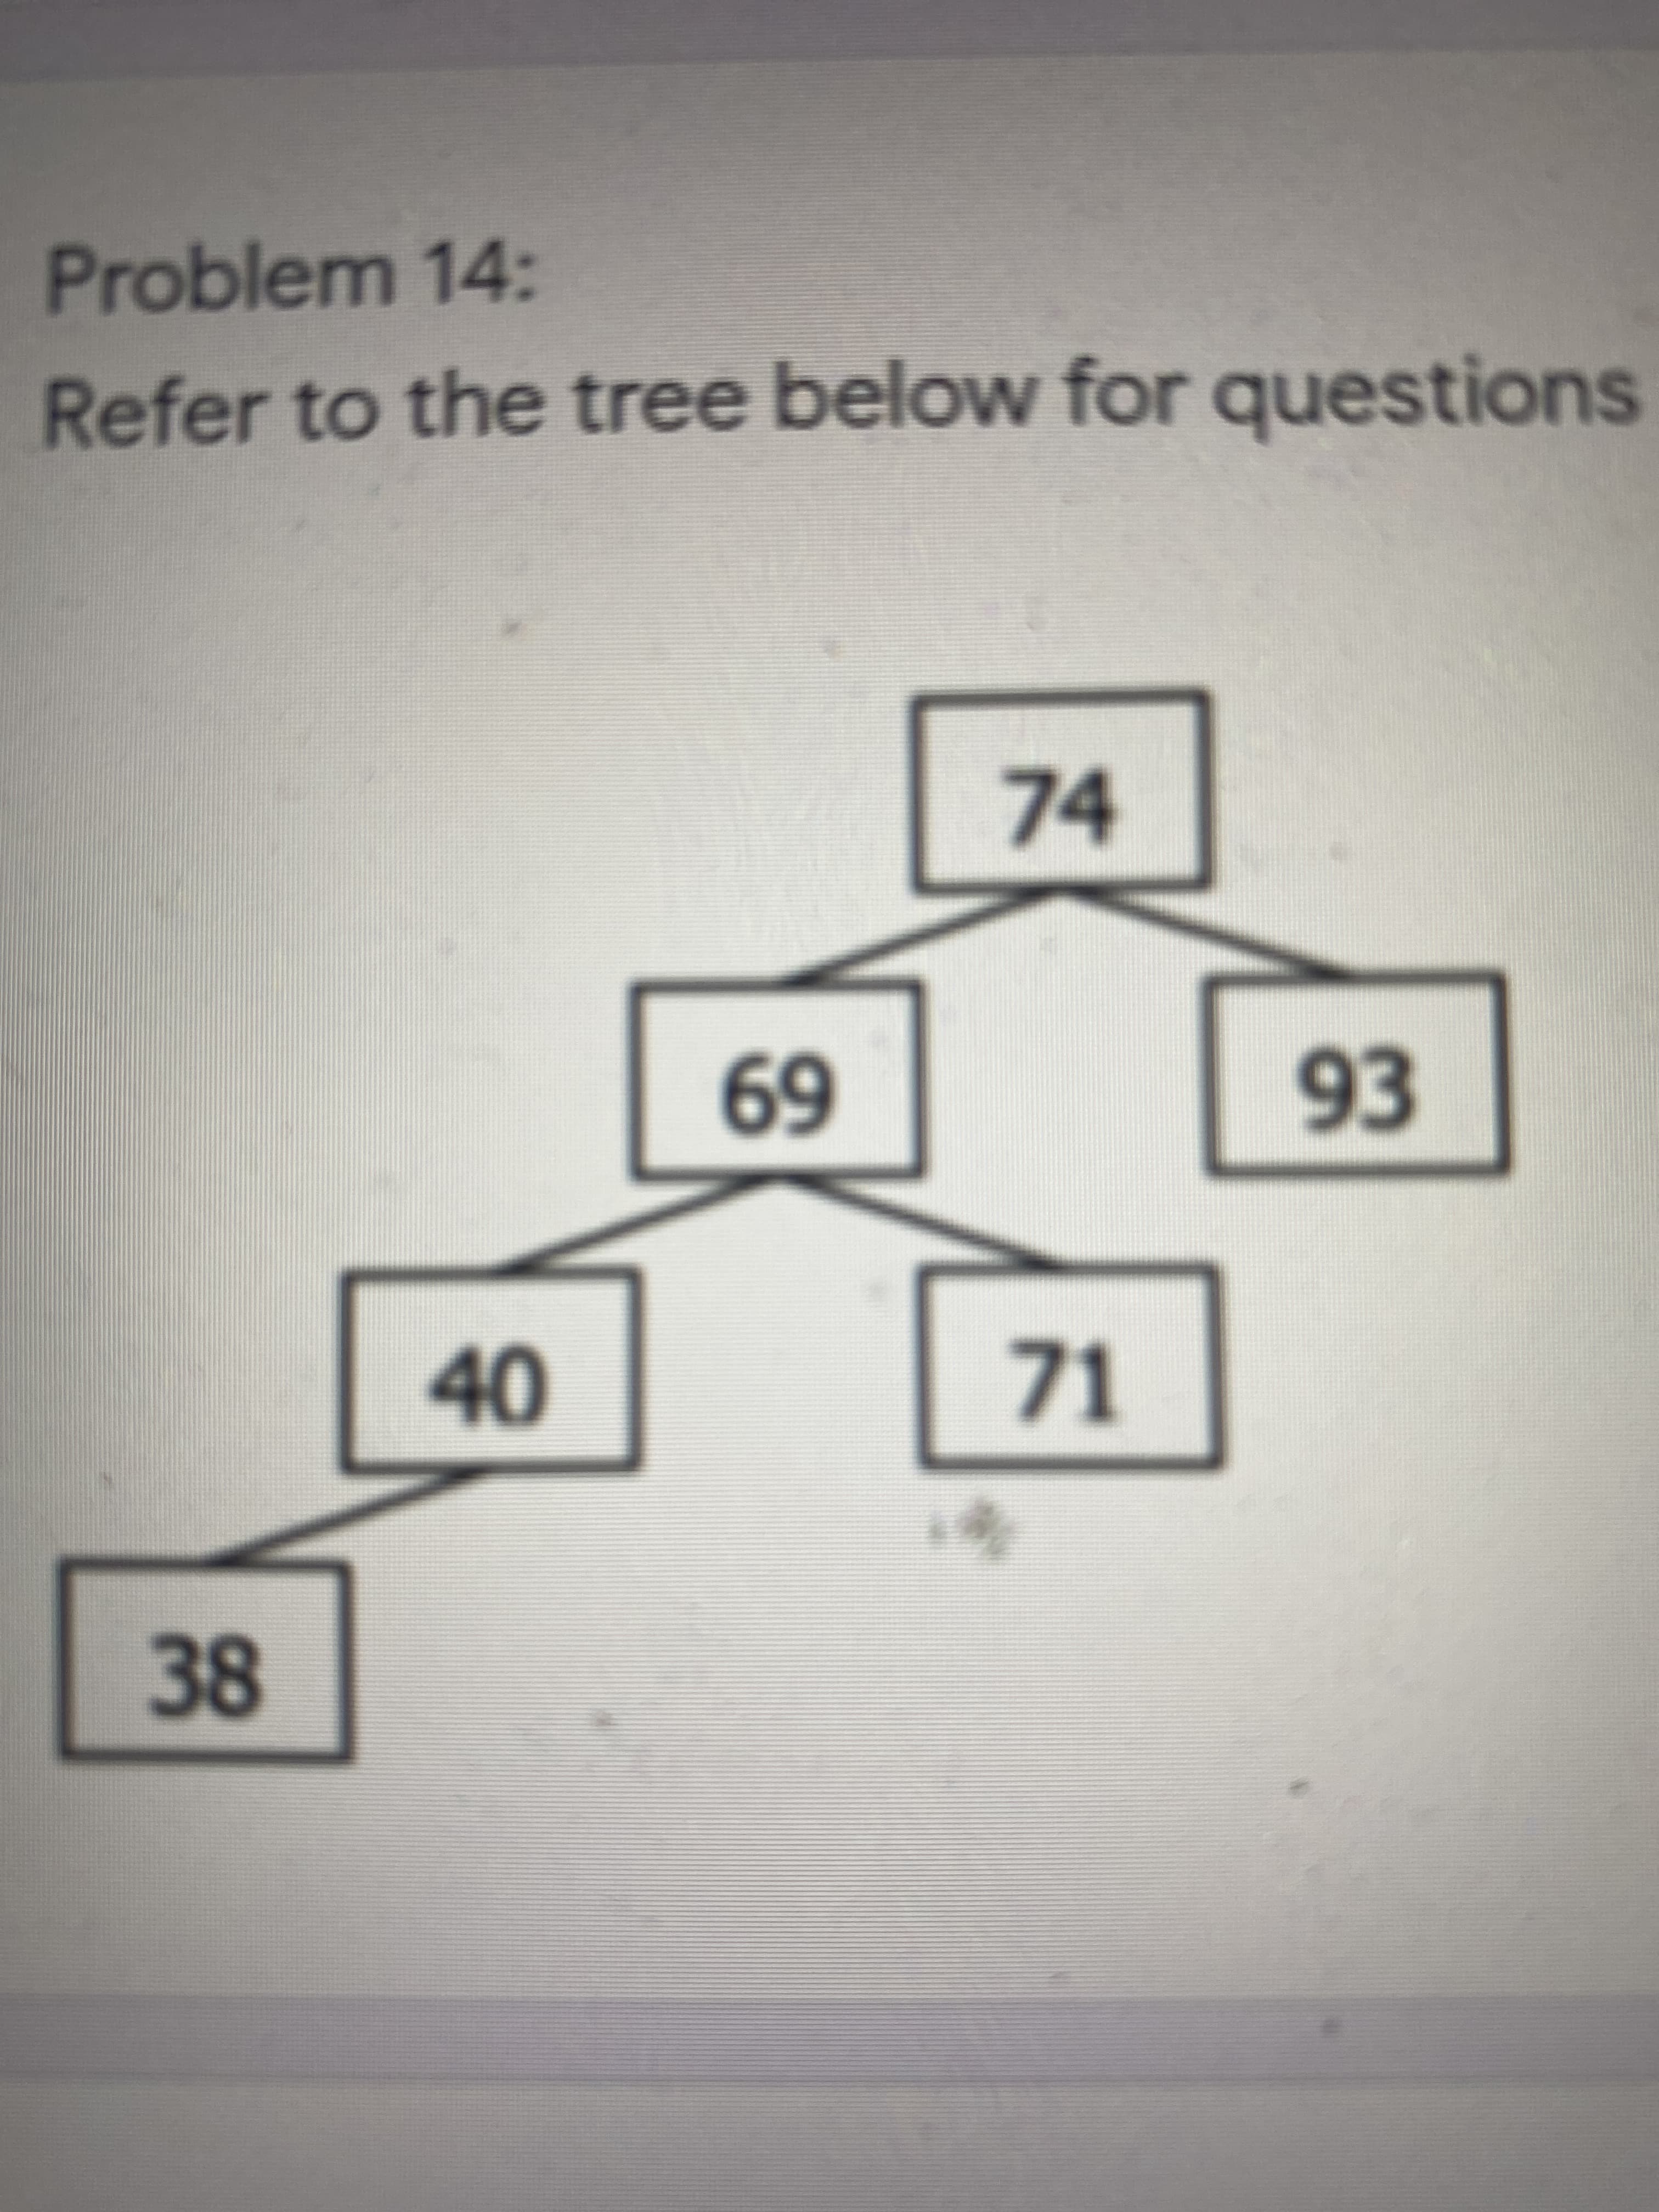 40
Problem 14:
Refer to the tree below for questions
74
93
69
71
38
